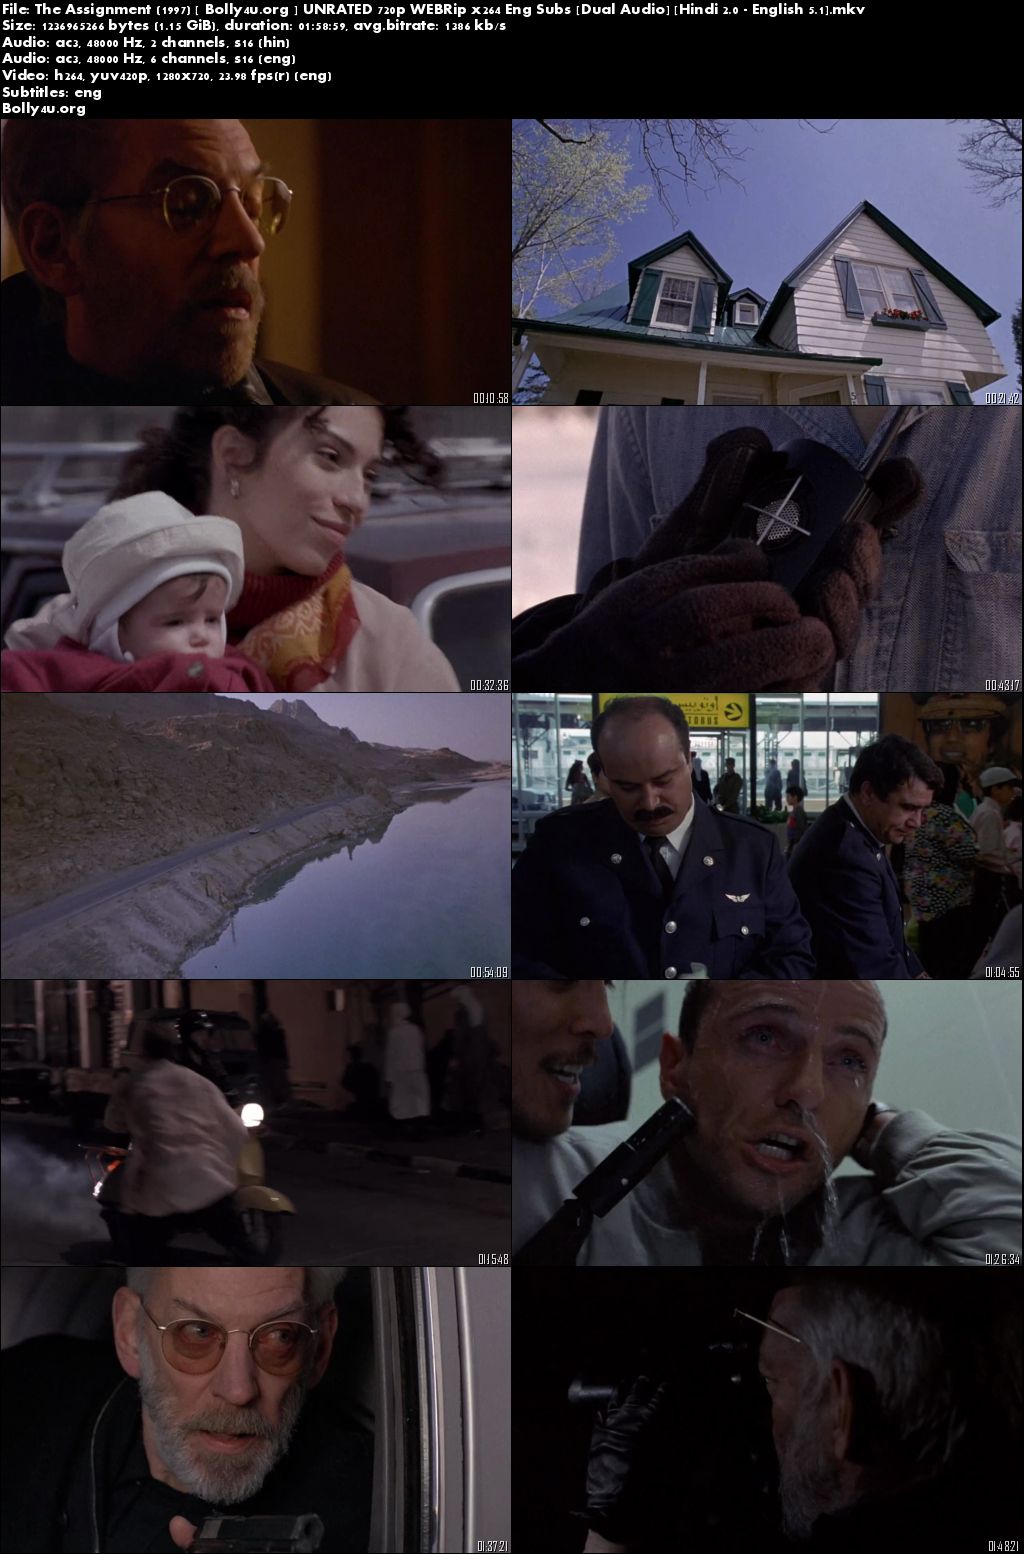 The Assignment 1997 WEBRip Hindi UNRATED Dual Audio ESub Download